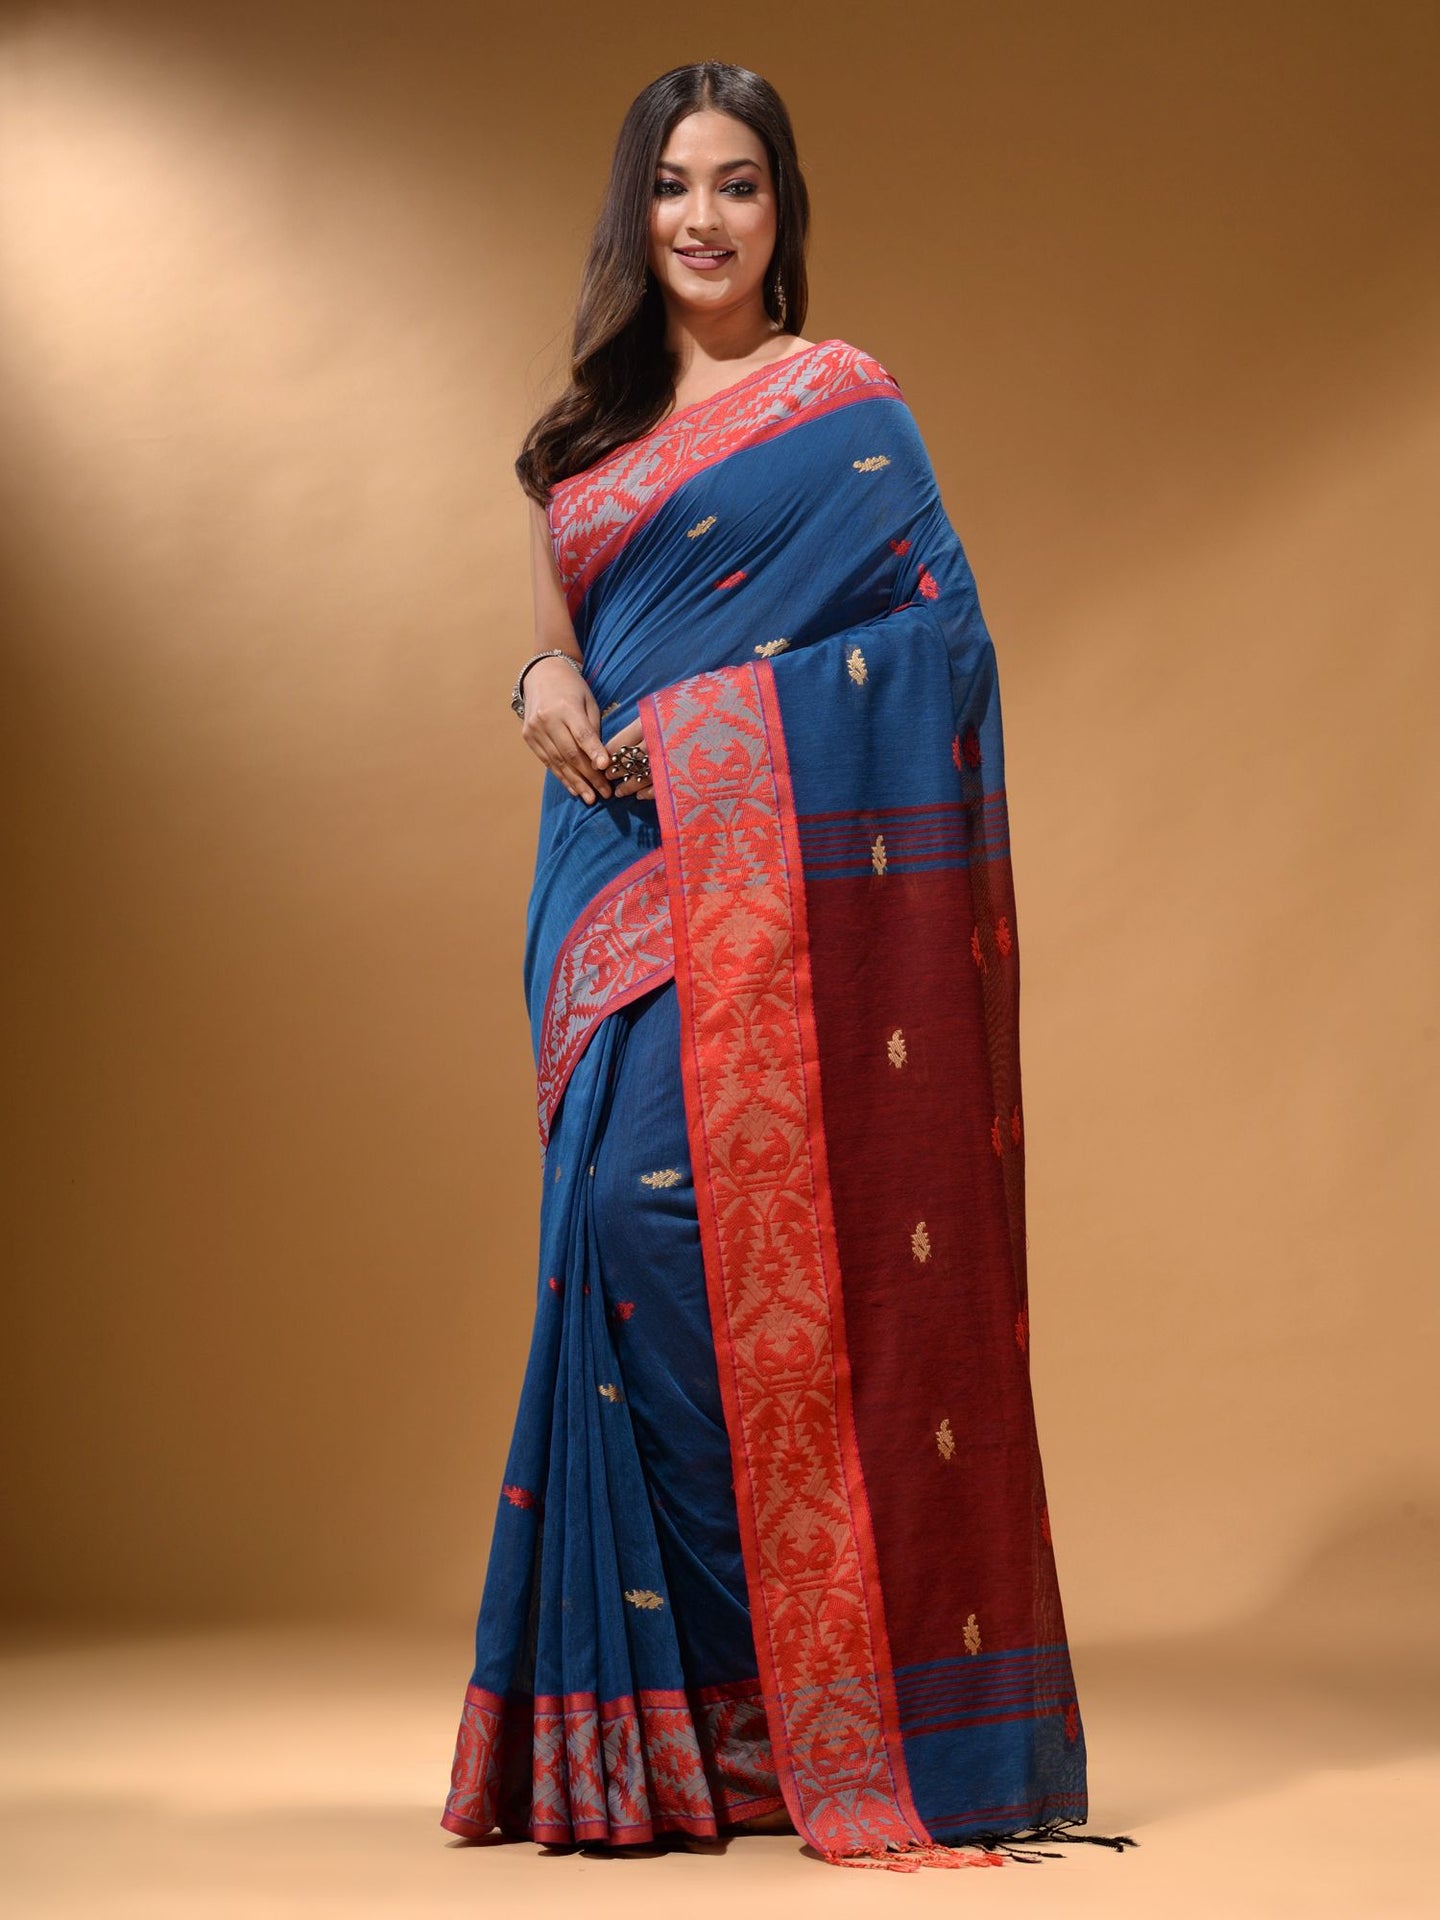 Yale Blue Cotton Handspun Soft Saree With Nakshi Border And Contrast With Red Pallu